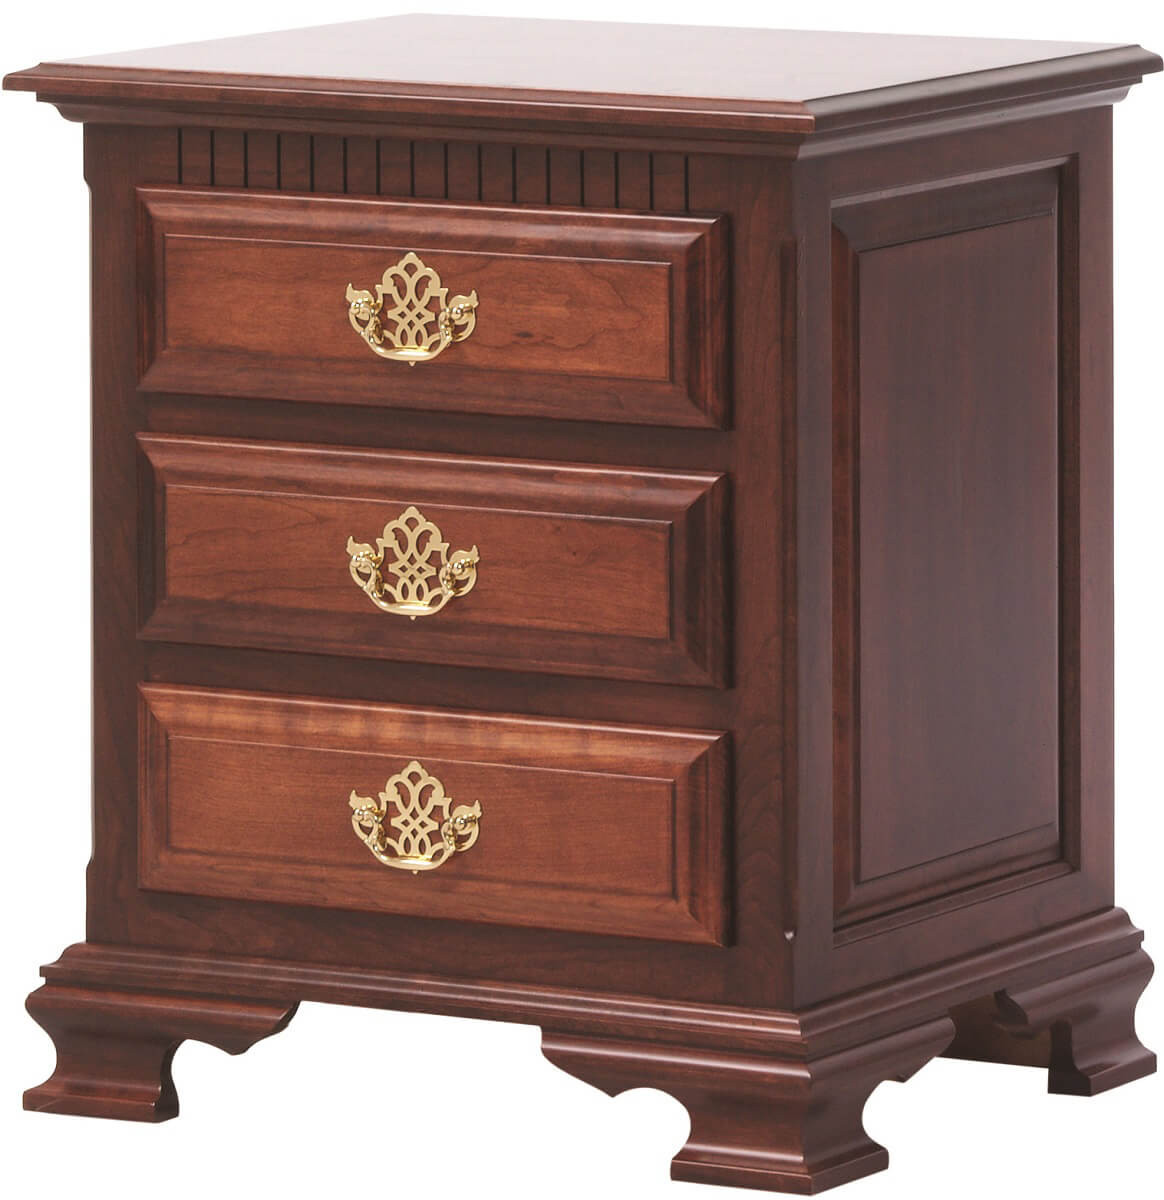 Elizabeth's Tradition 3-Drawer Nightstand in Cherry
